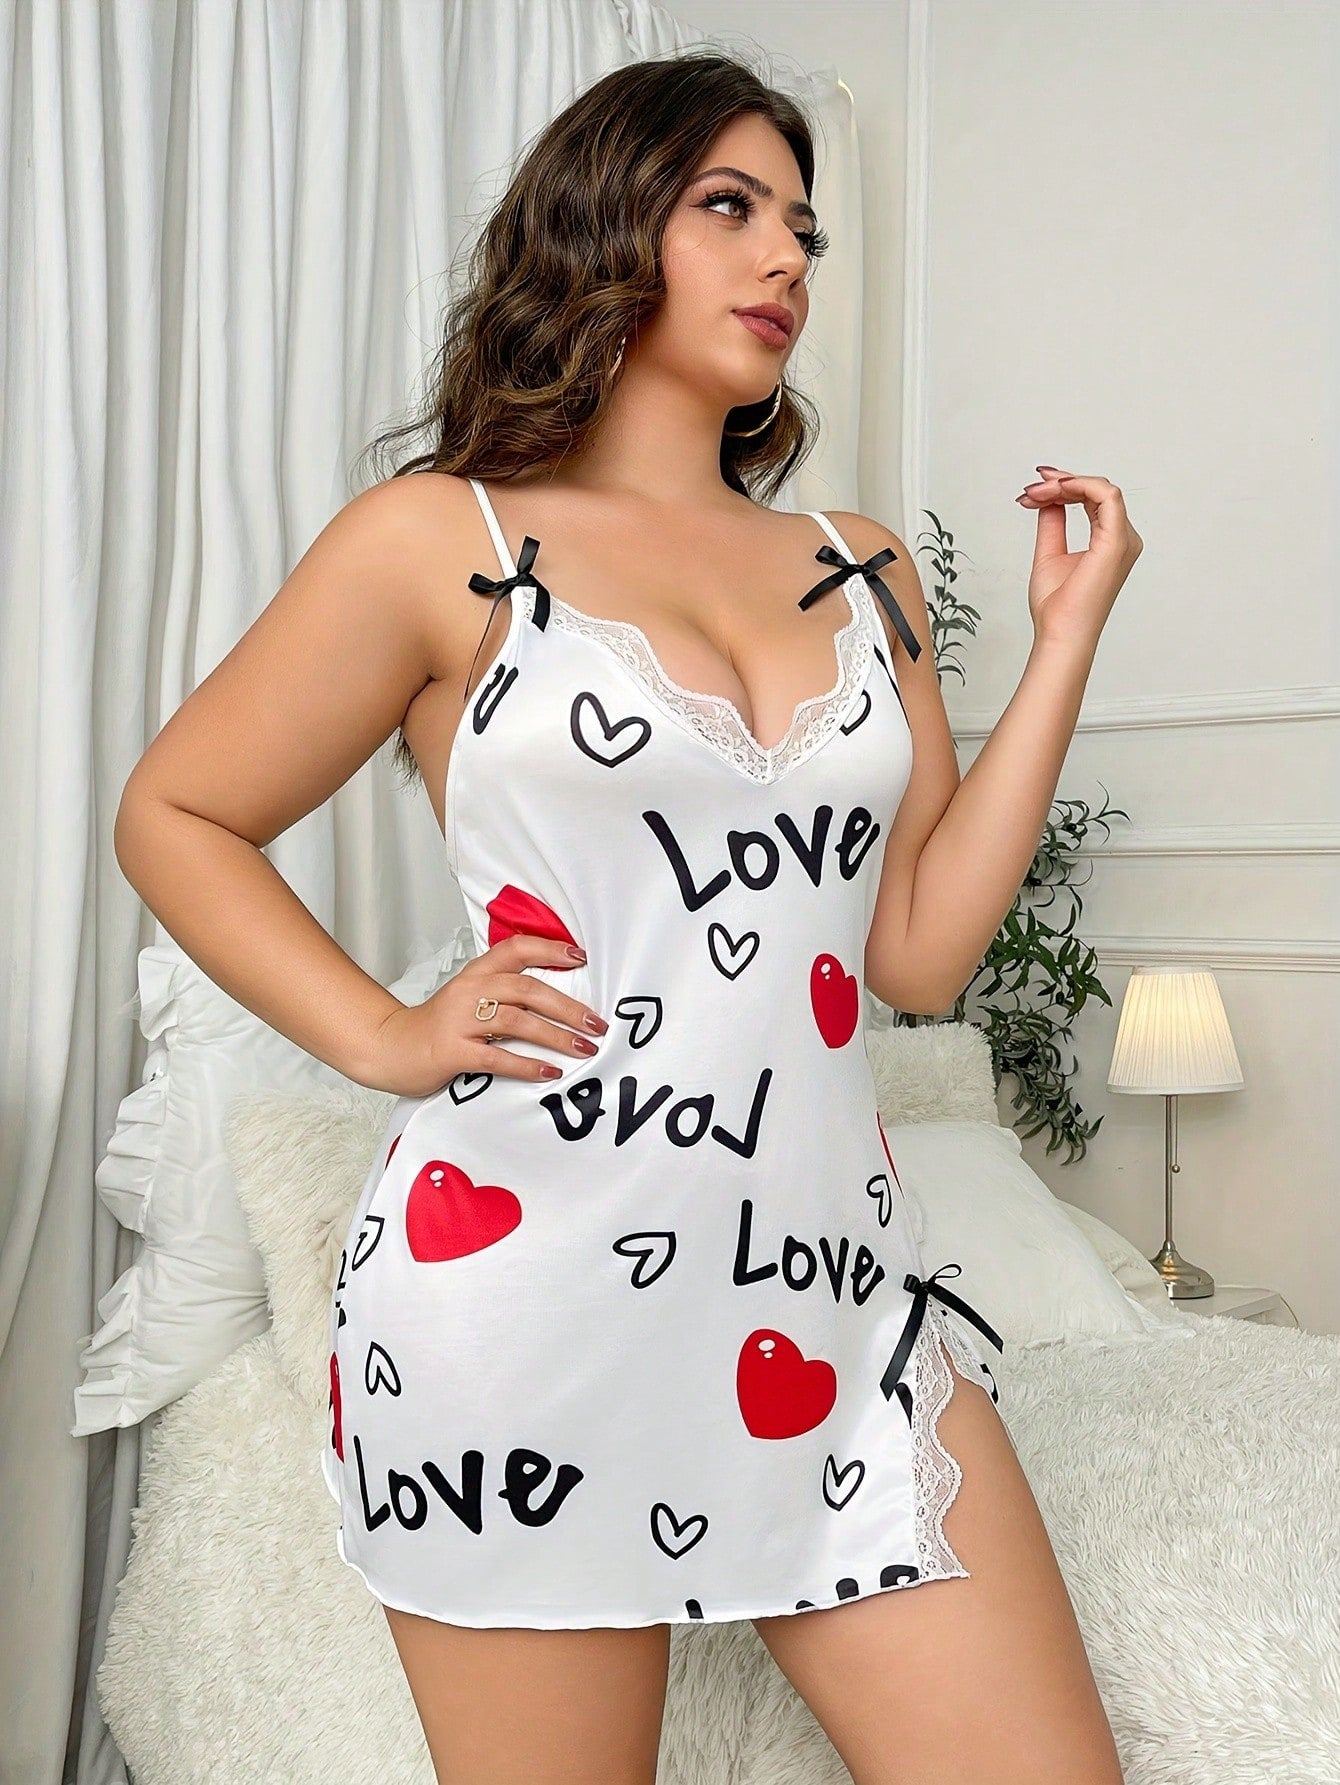 Sweetheart Dreams: Love & Heart Lace Trimmed Cami Nightgown